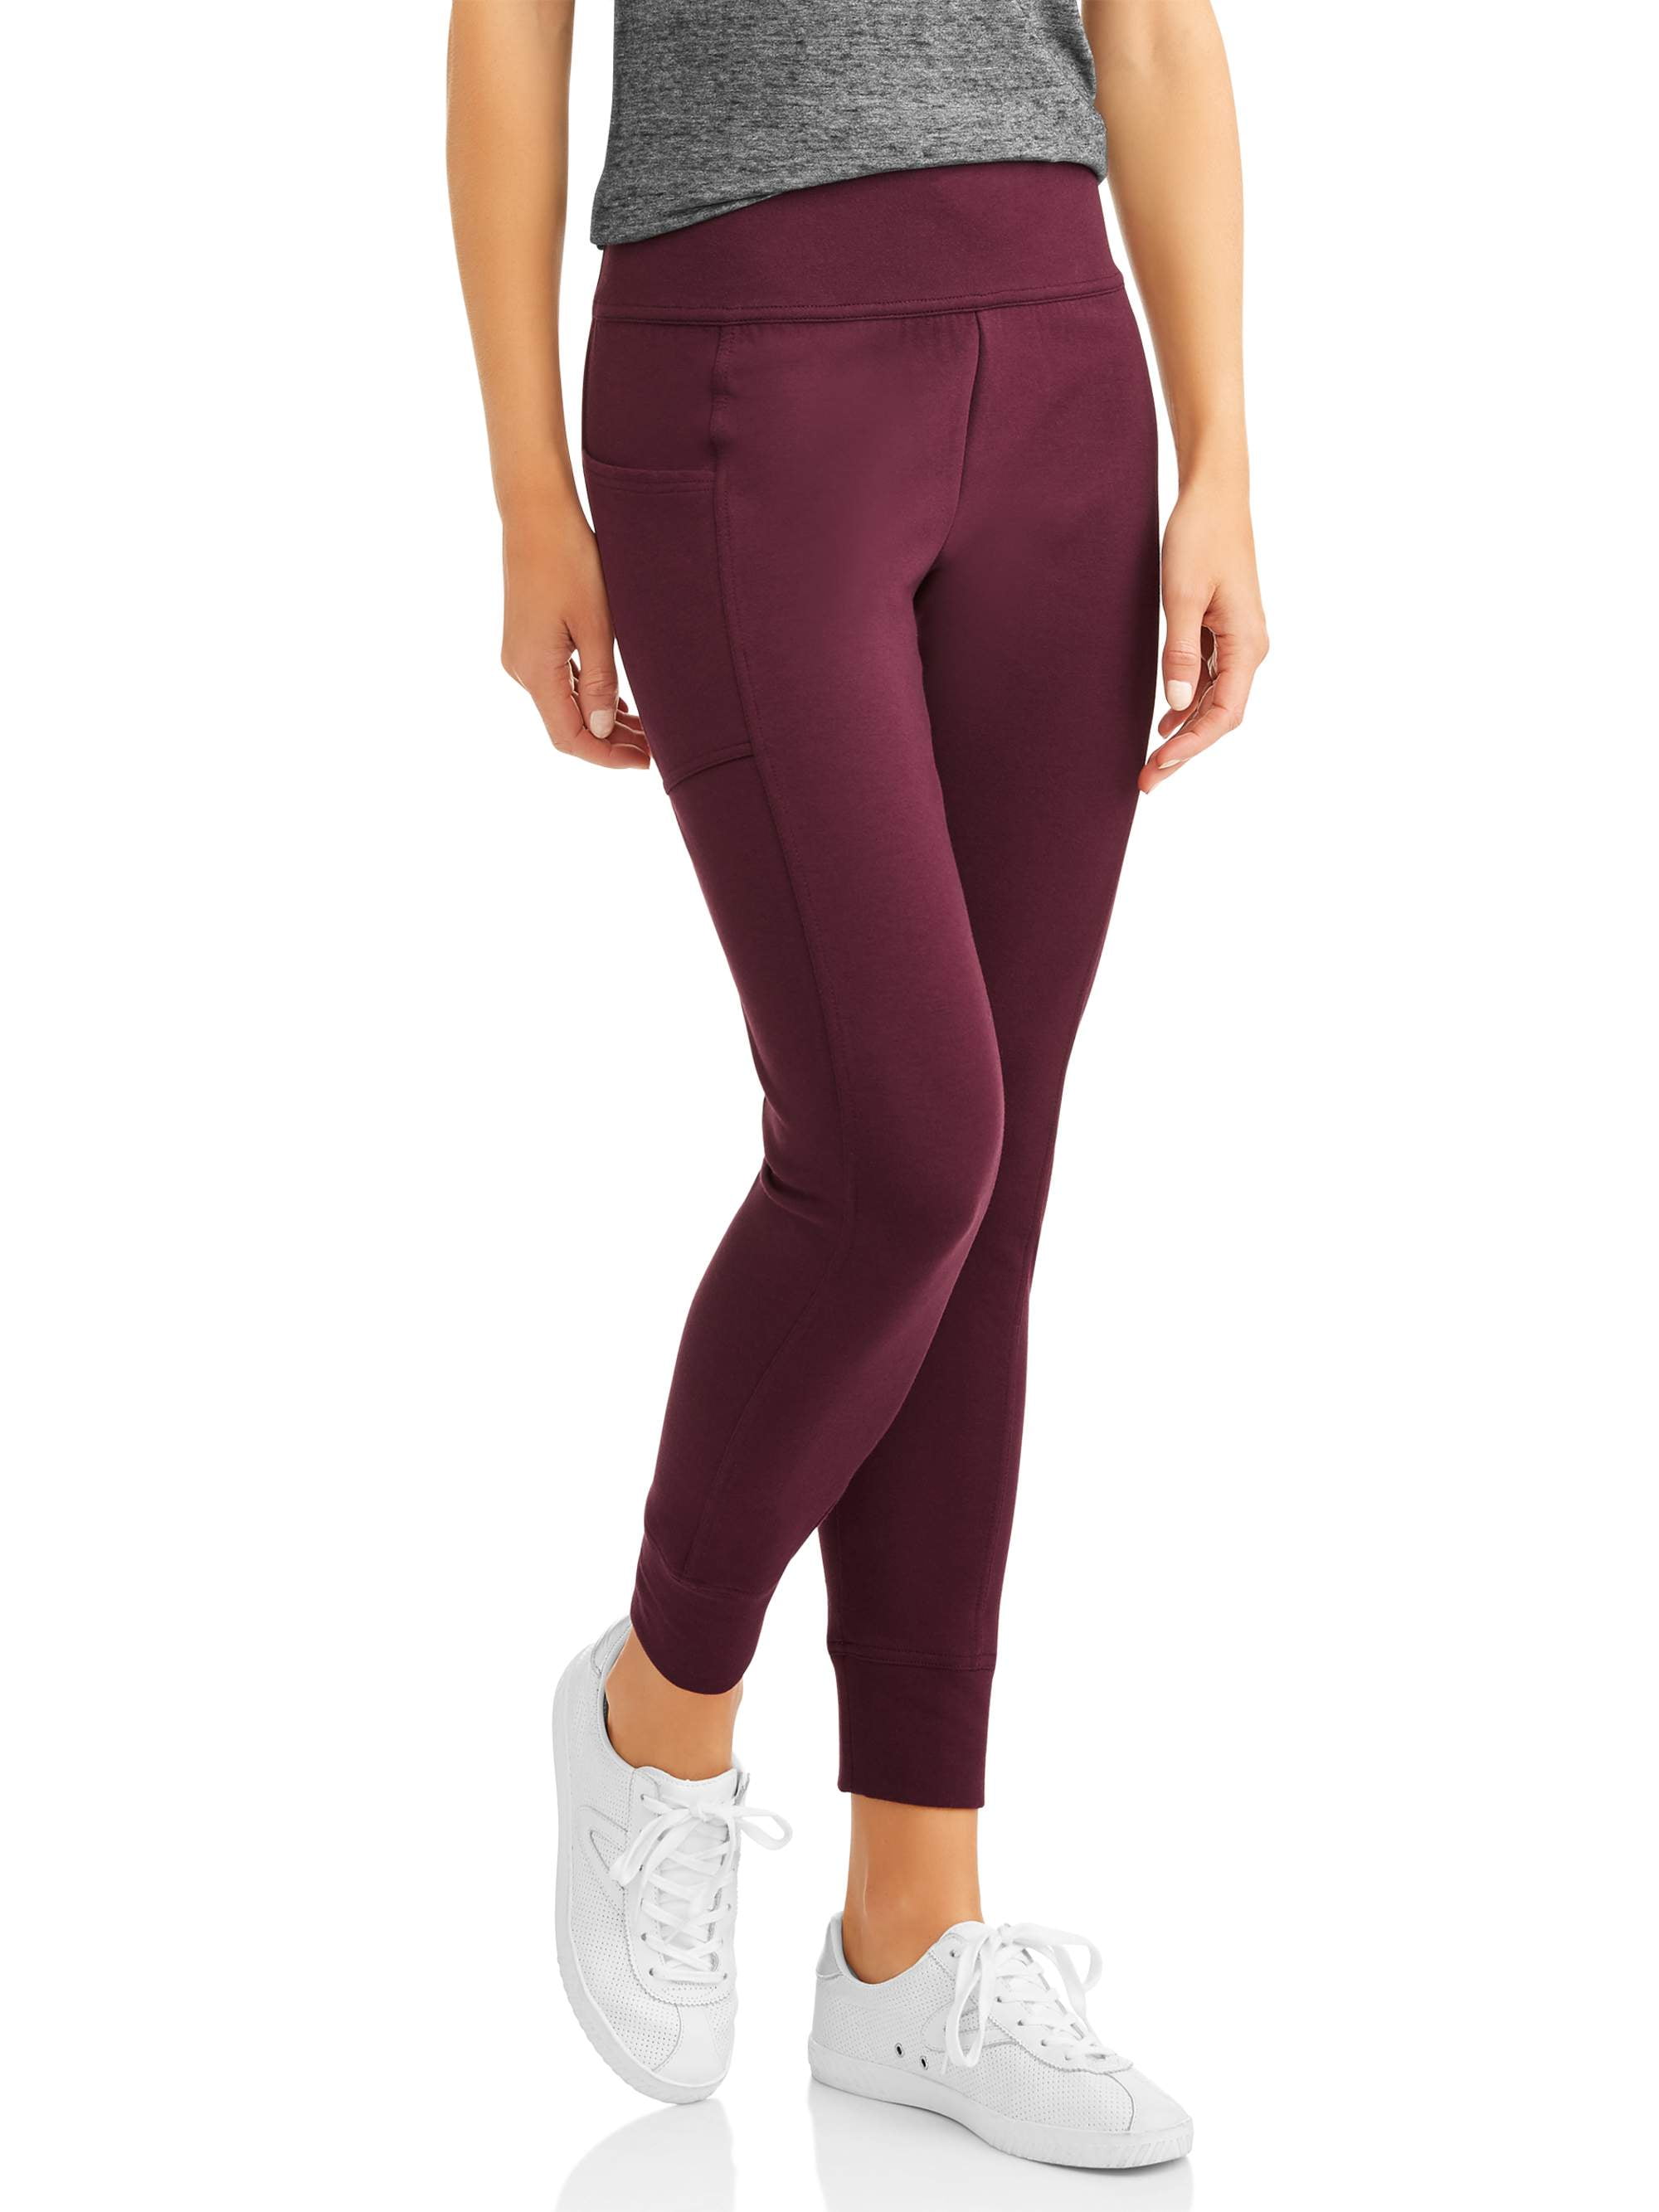 Avia Women's Lightweight Active Pant with Media Pocket 